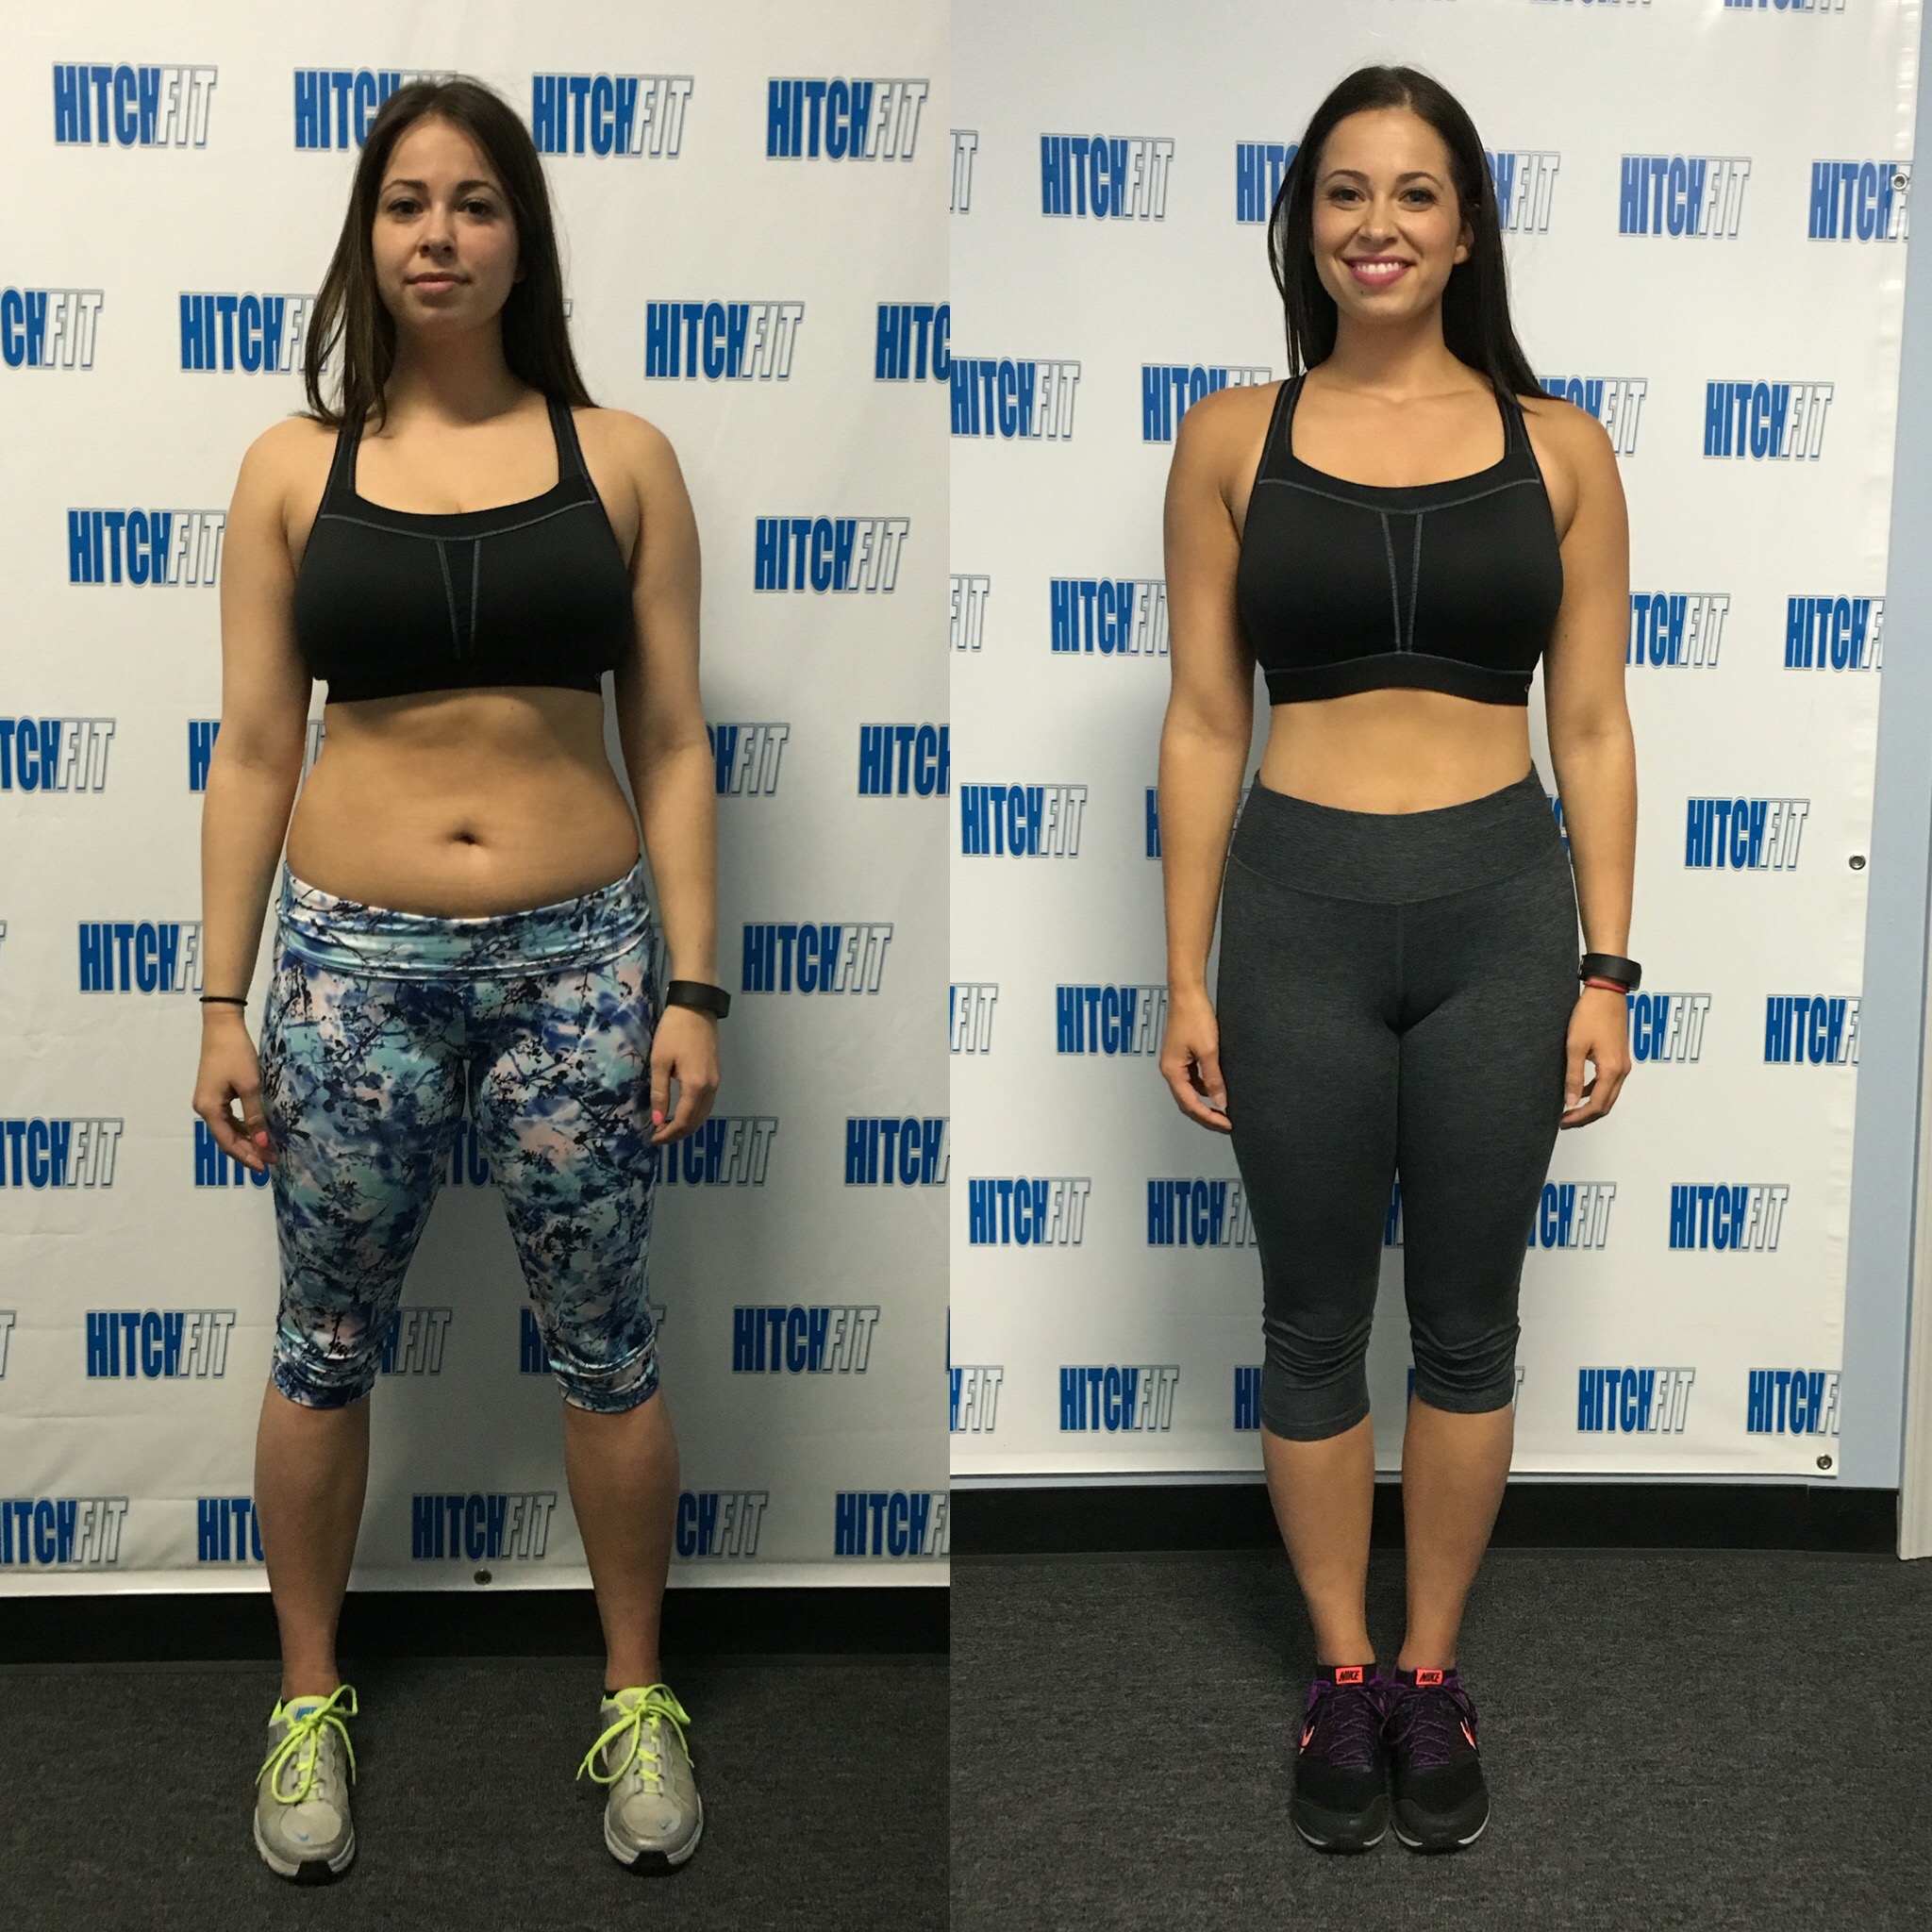 12 Week Weight Loss Overland Park - Before and After Hitch Fit Personal Training Viktoria